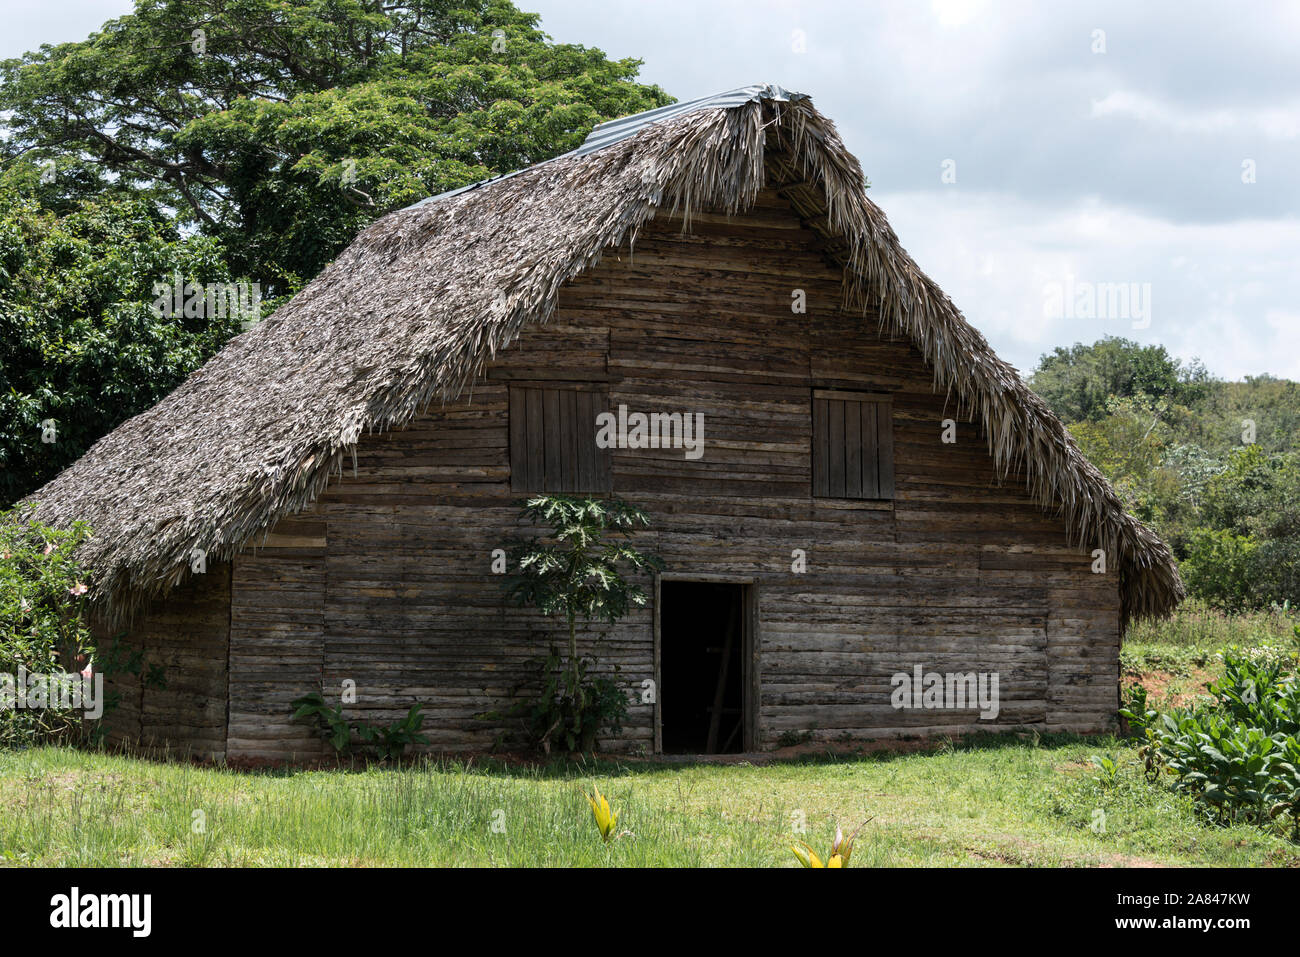 A thatched roof covered with palm leaves over a tobacco leaf drying shed in the Valle de Vinales, Pinar del Río Province, west Cuba, a UNESCO world cu Stock Photo